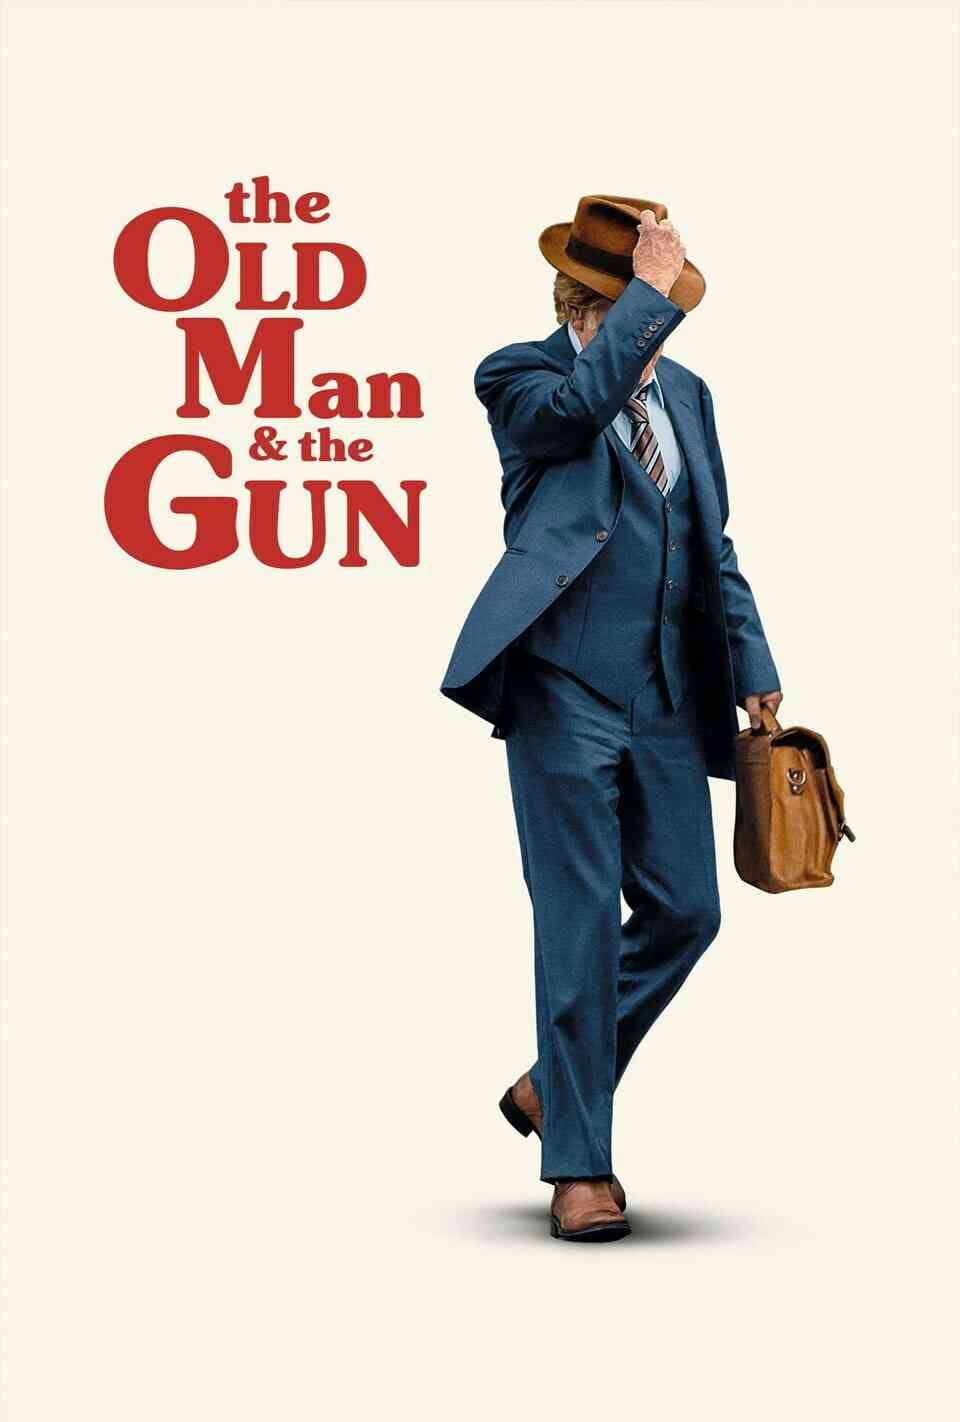 Read Old Man and the Gun screenplay (poster)